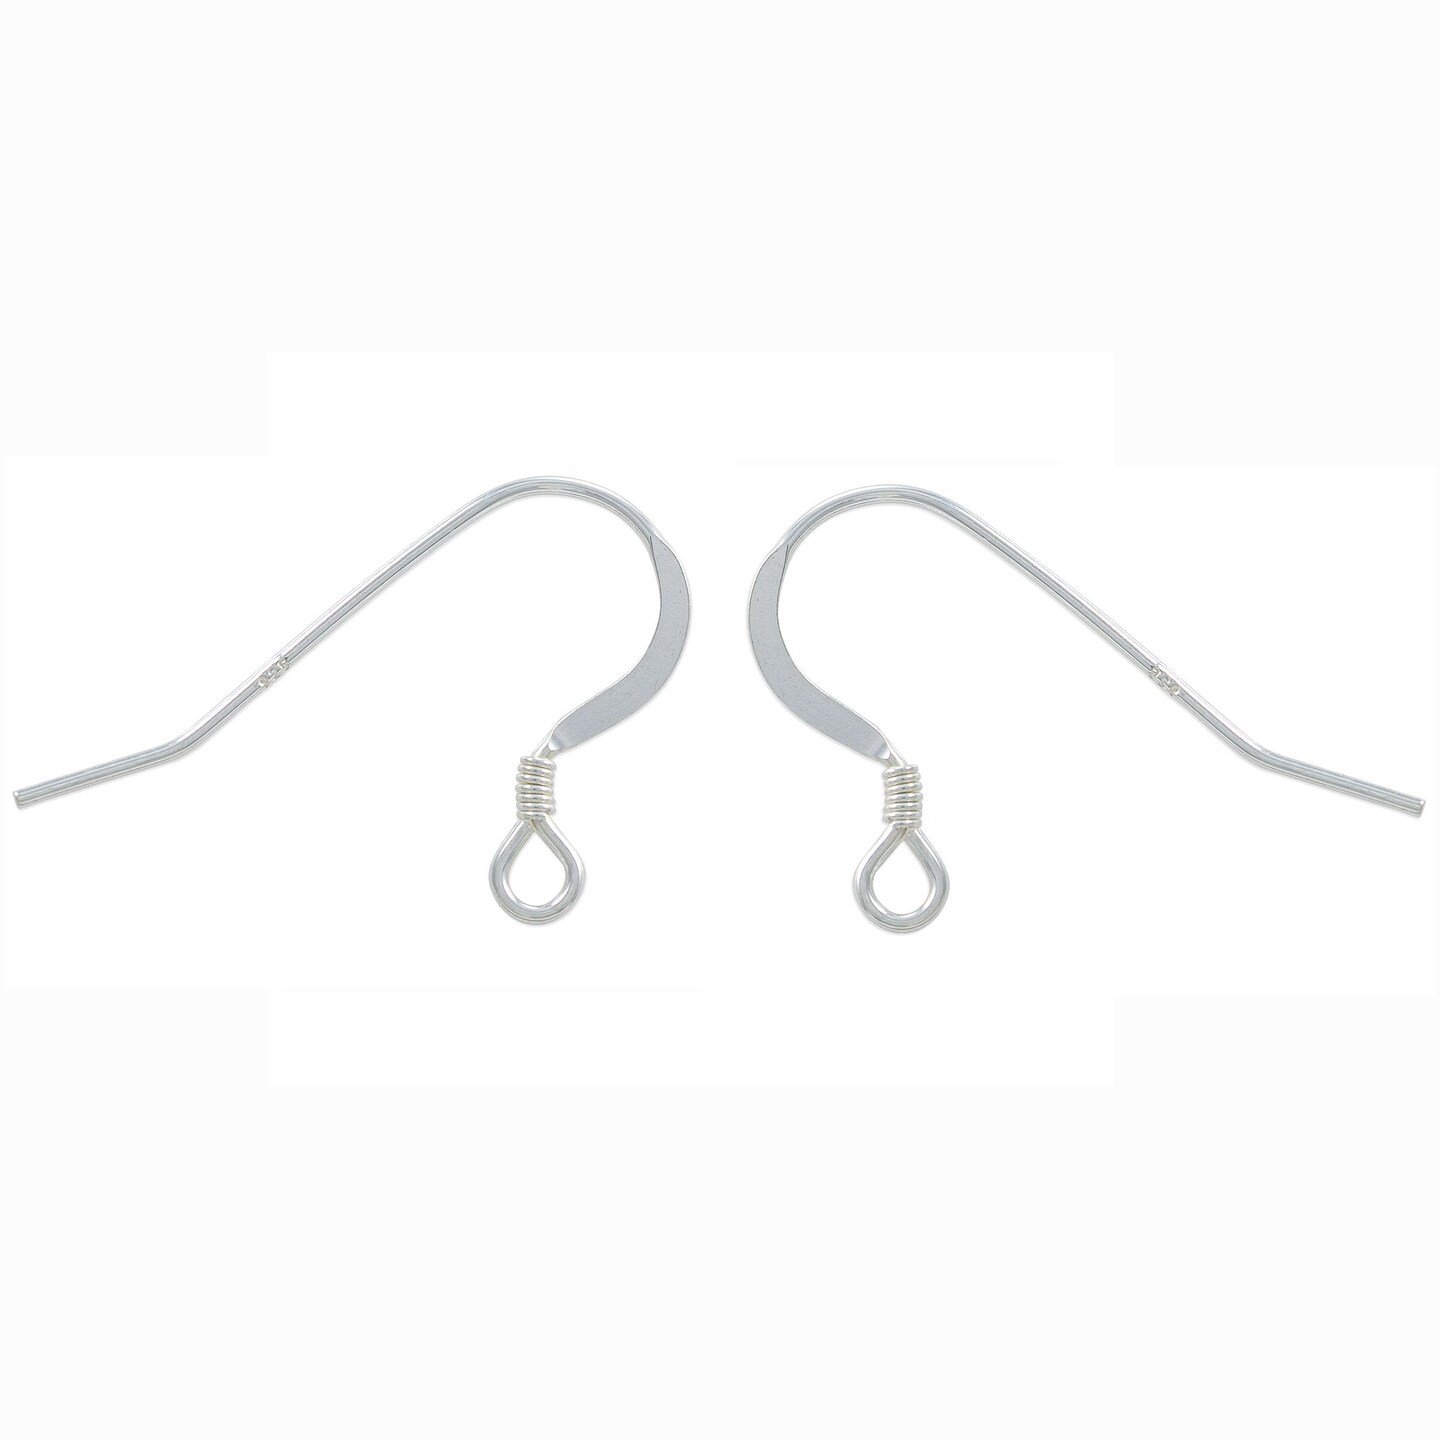 JewelrySupply Sterling Silver Flat Fish Hook Earring Wires with